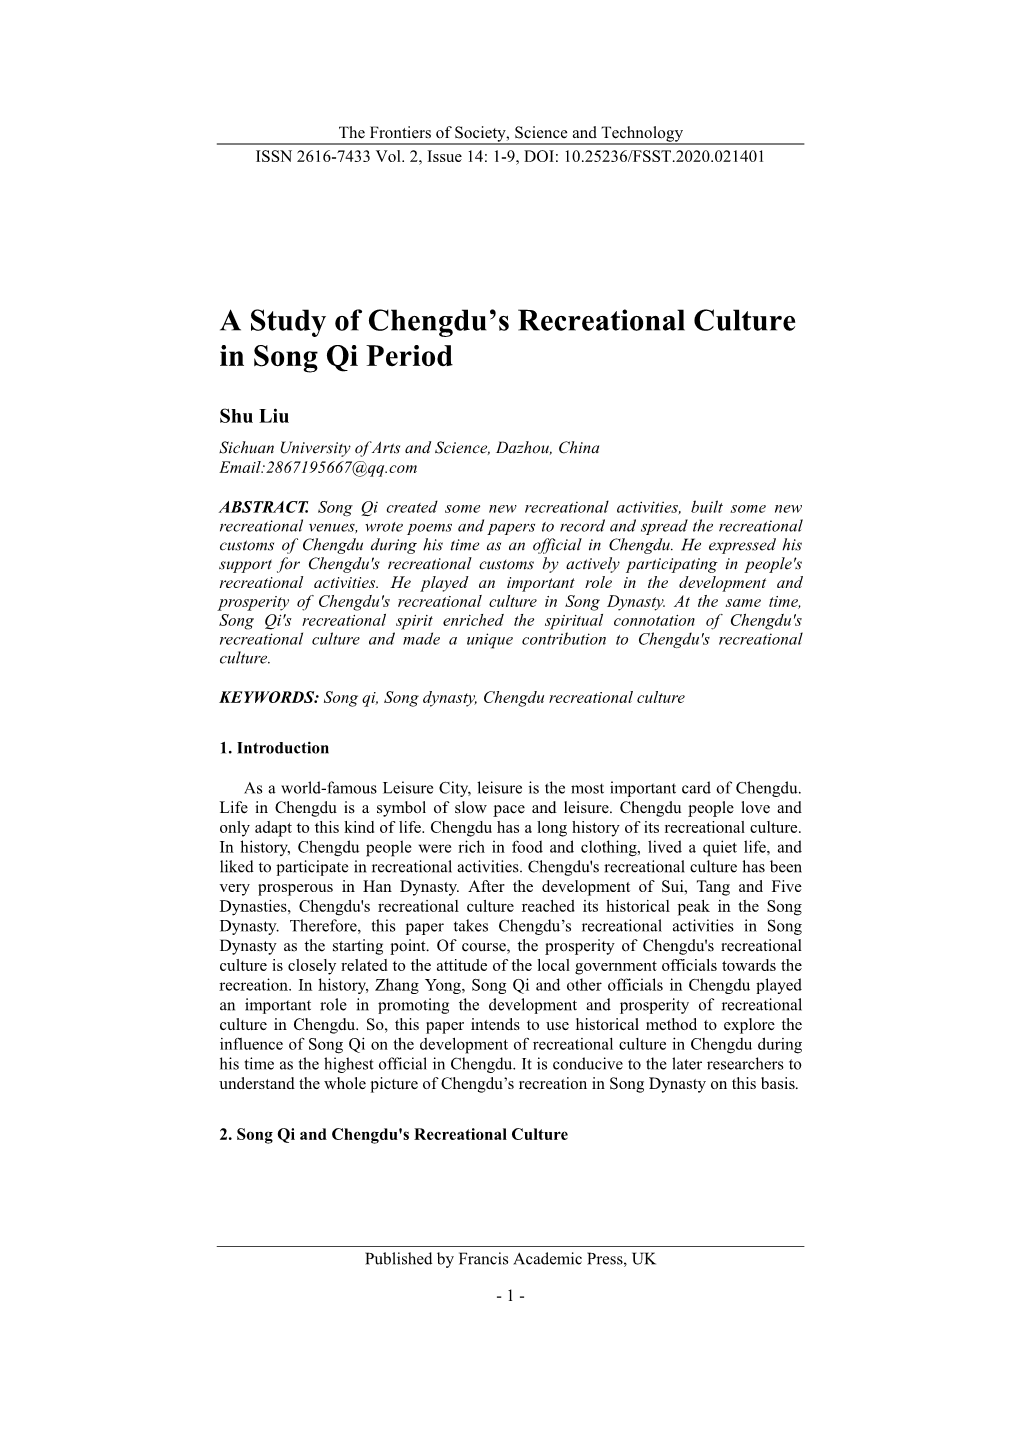 A Study of Chengdu's Recreational Culture in Song Qi Period